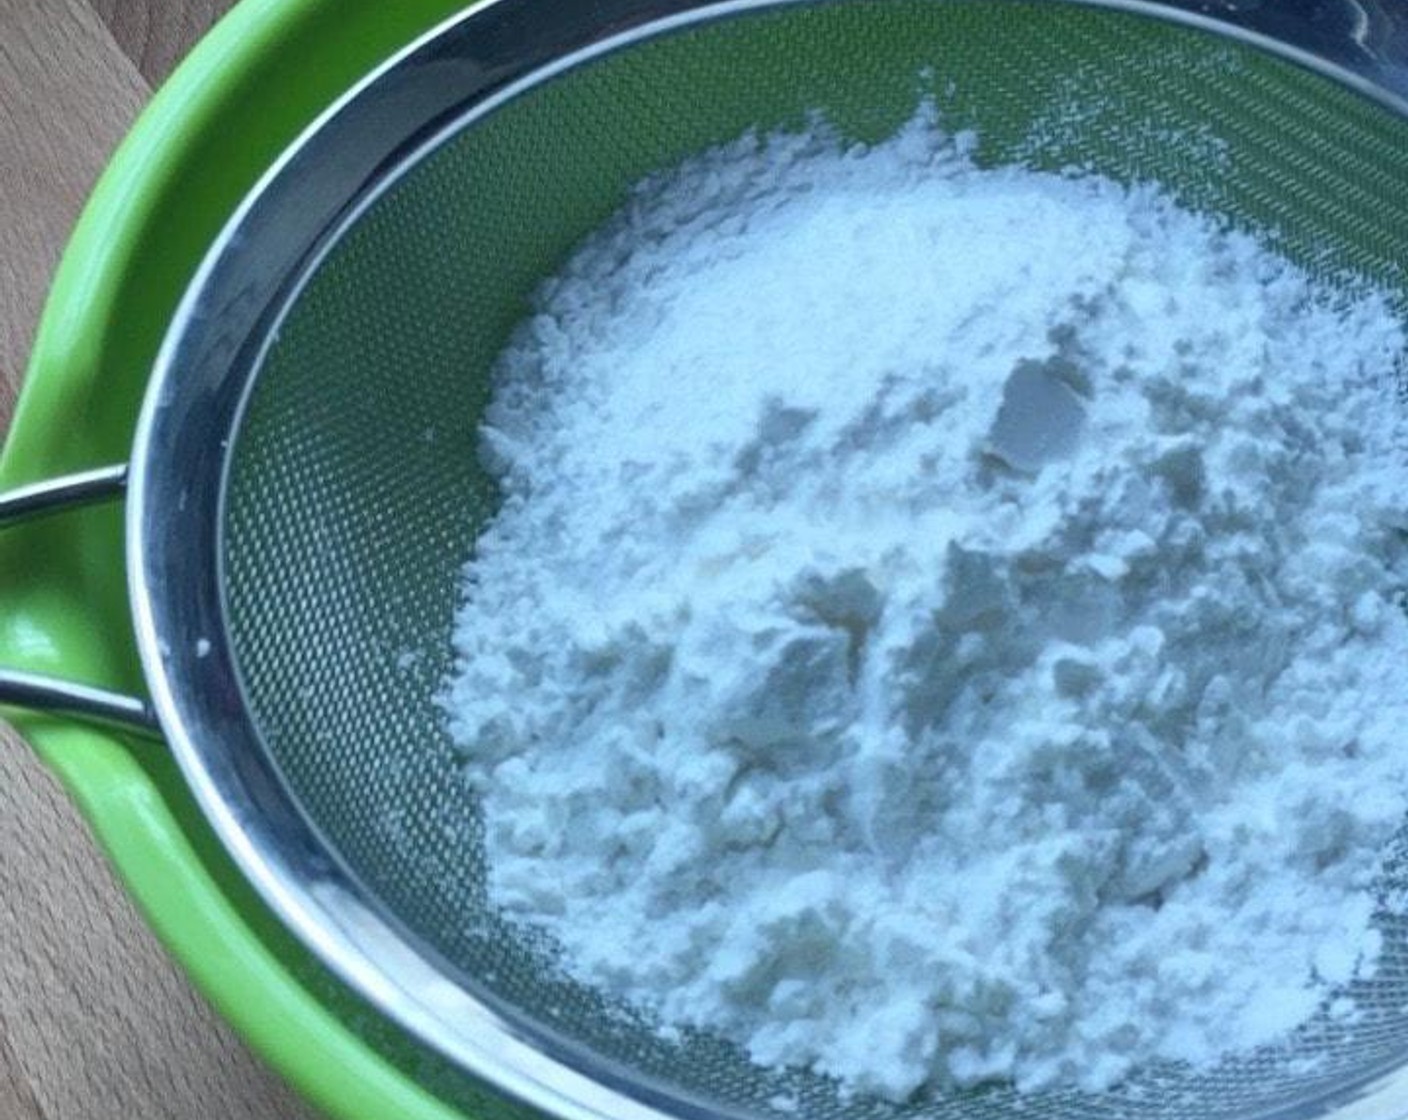 step 1 First, sift All-Purpose Flour (1/3 cup), Rice Flour (1/3 cup) and Corn Starch (3 1/2 Tbsp) into a mixing bowl. Then add in Salt (1/4 tsp).